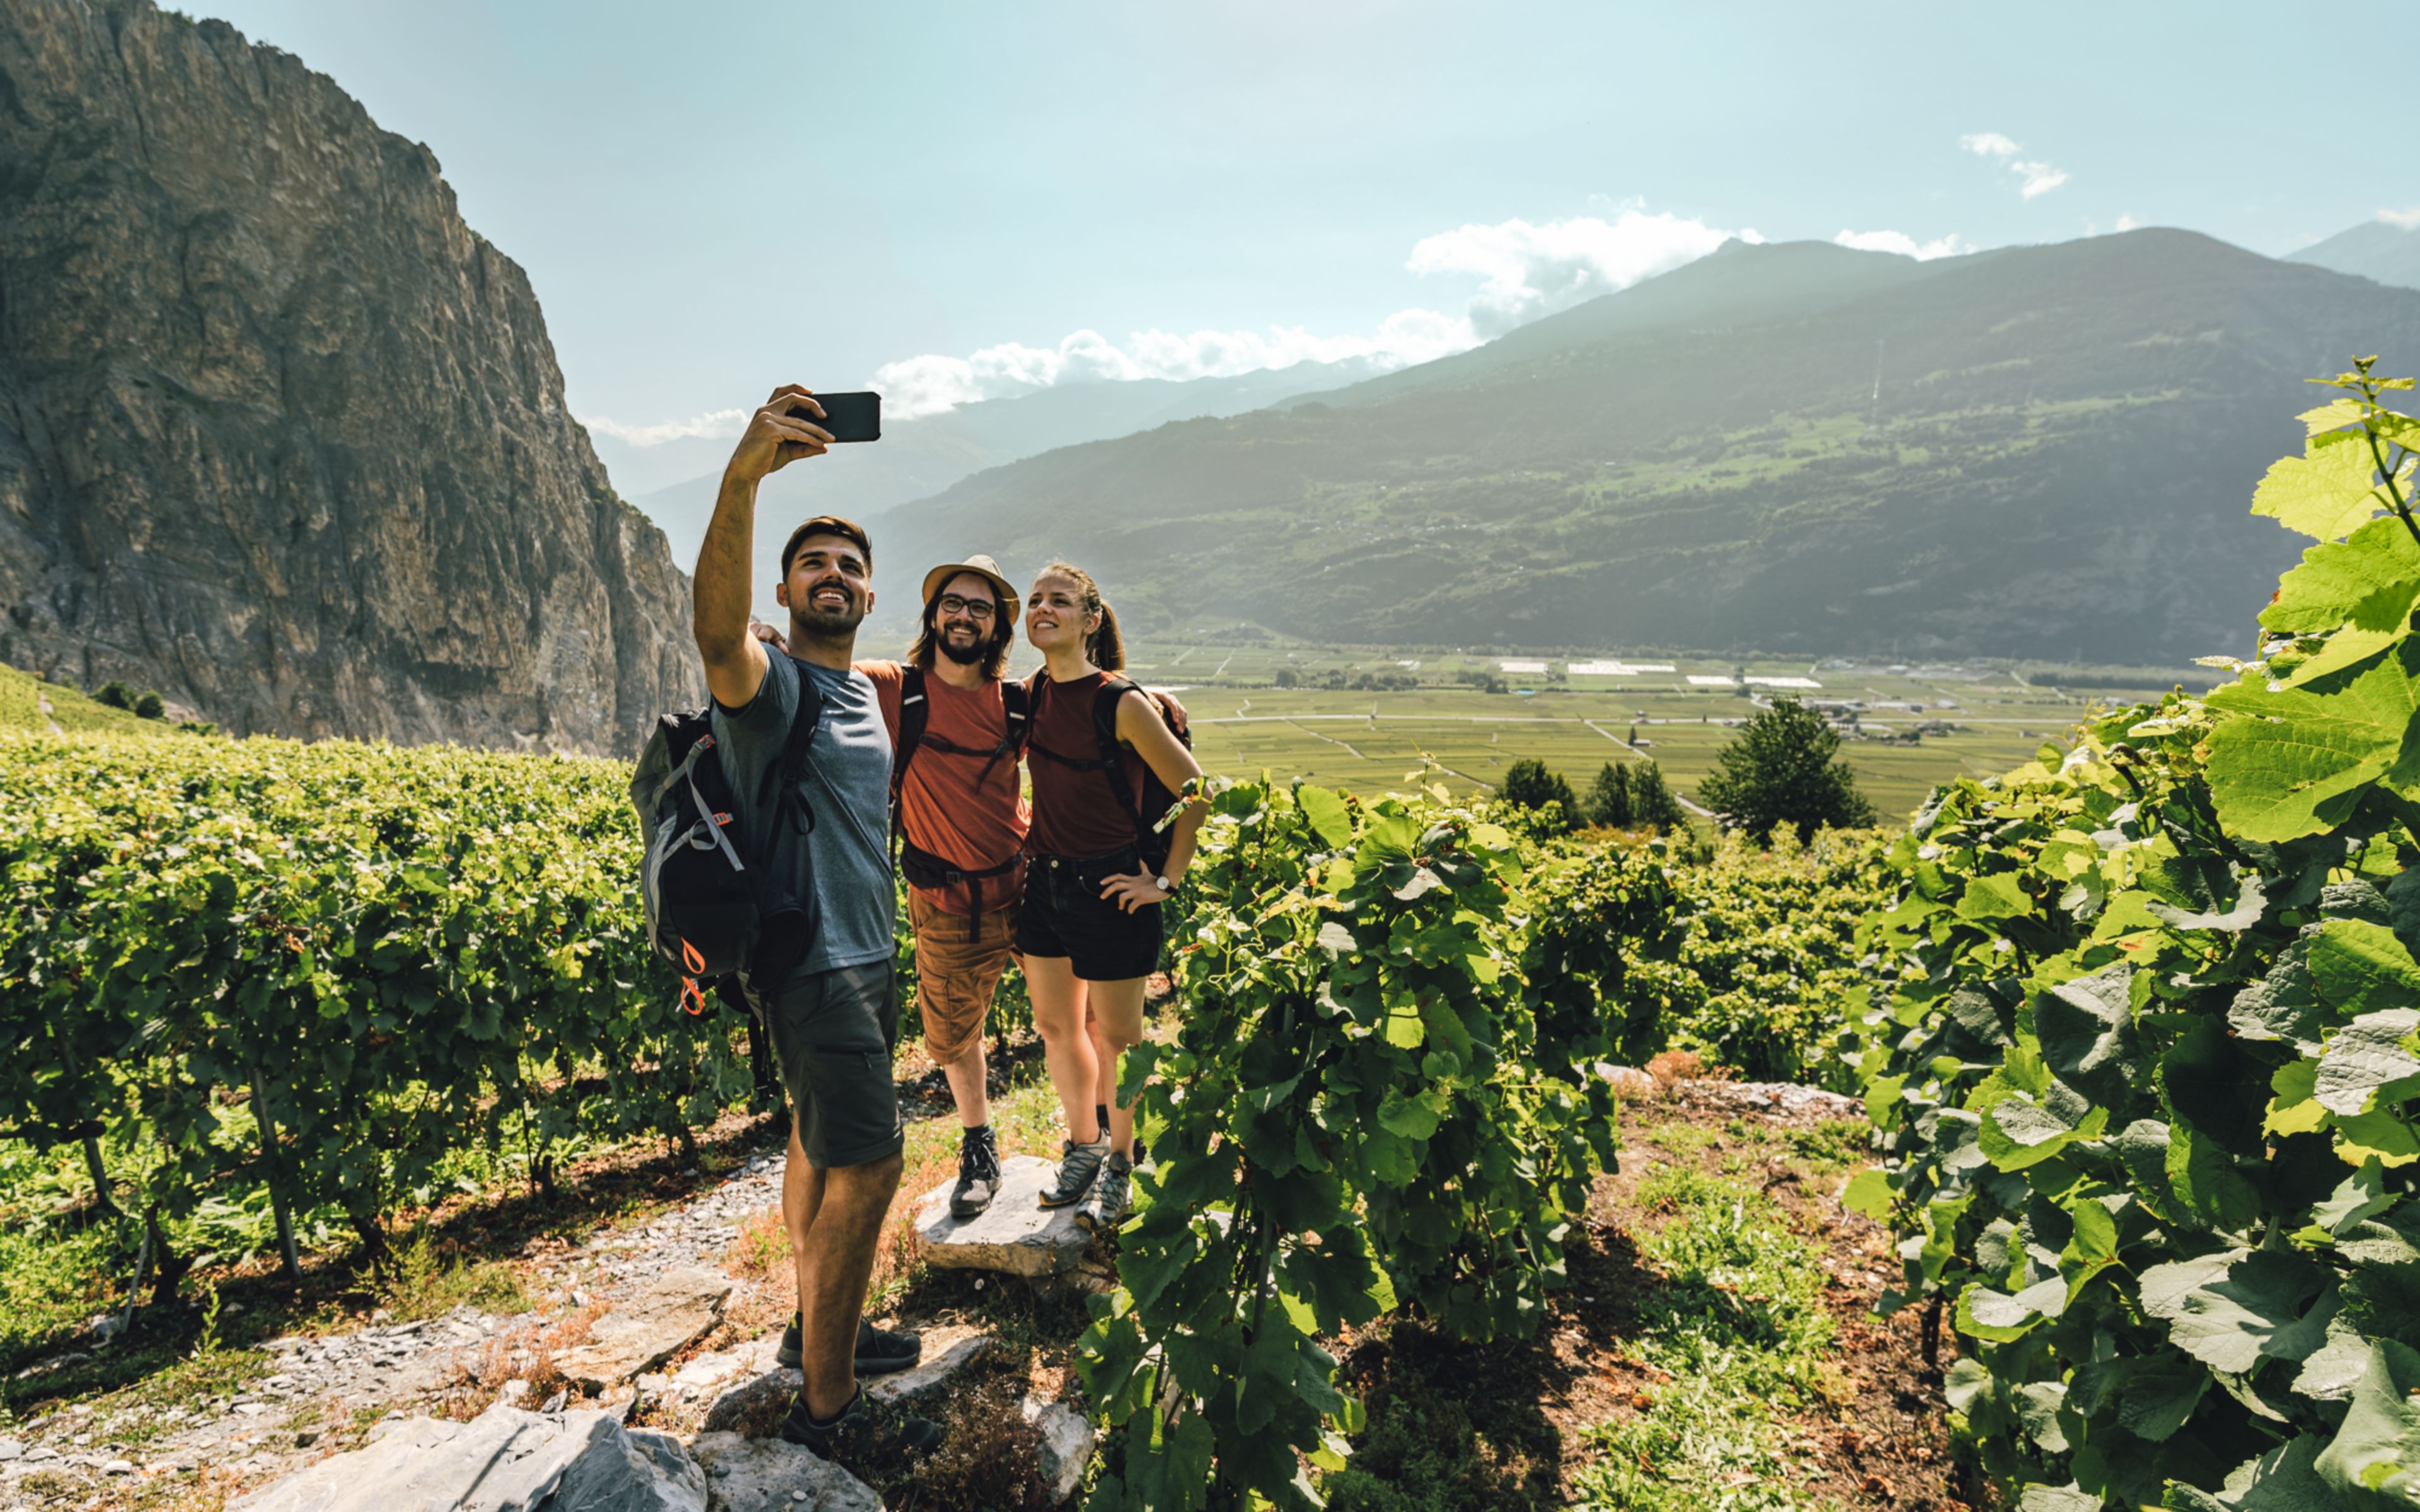 3 adults take a picture selfie in the vineyard of Chamoson, Valais, Switzerland